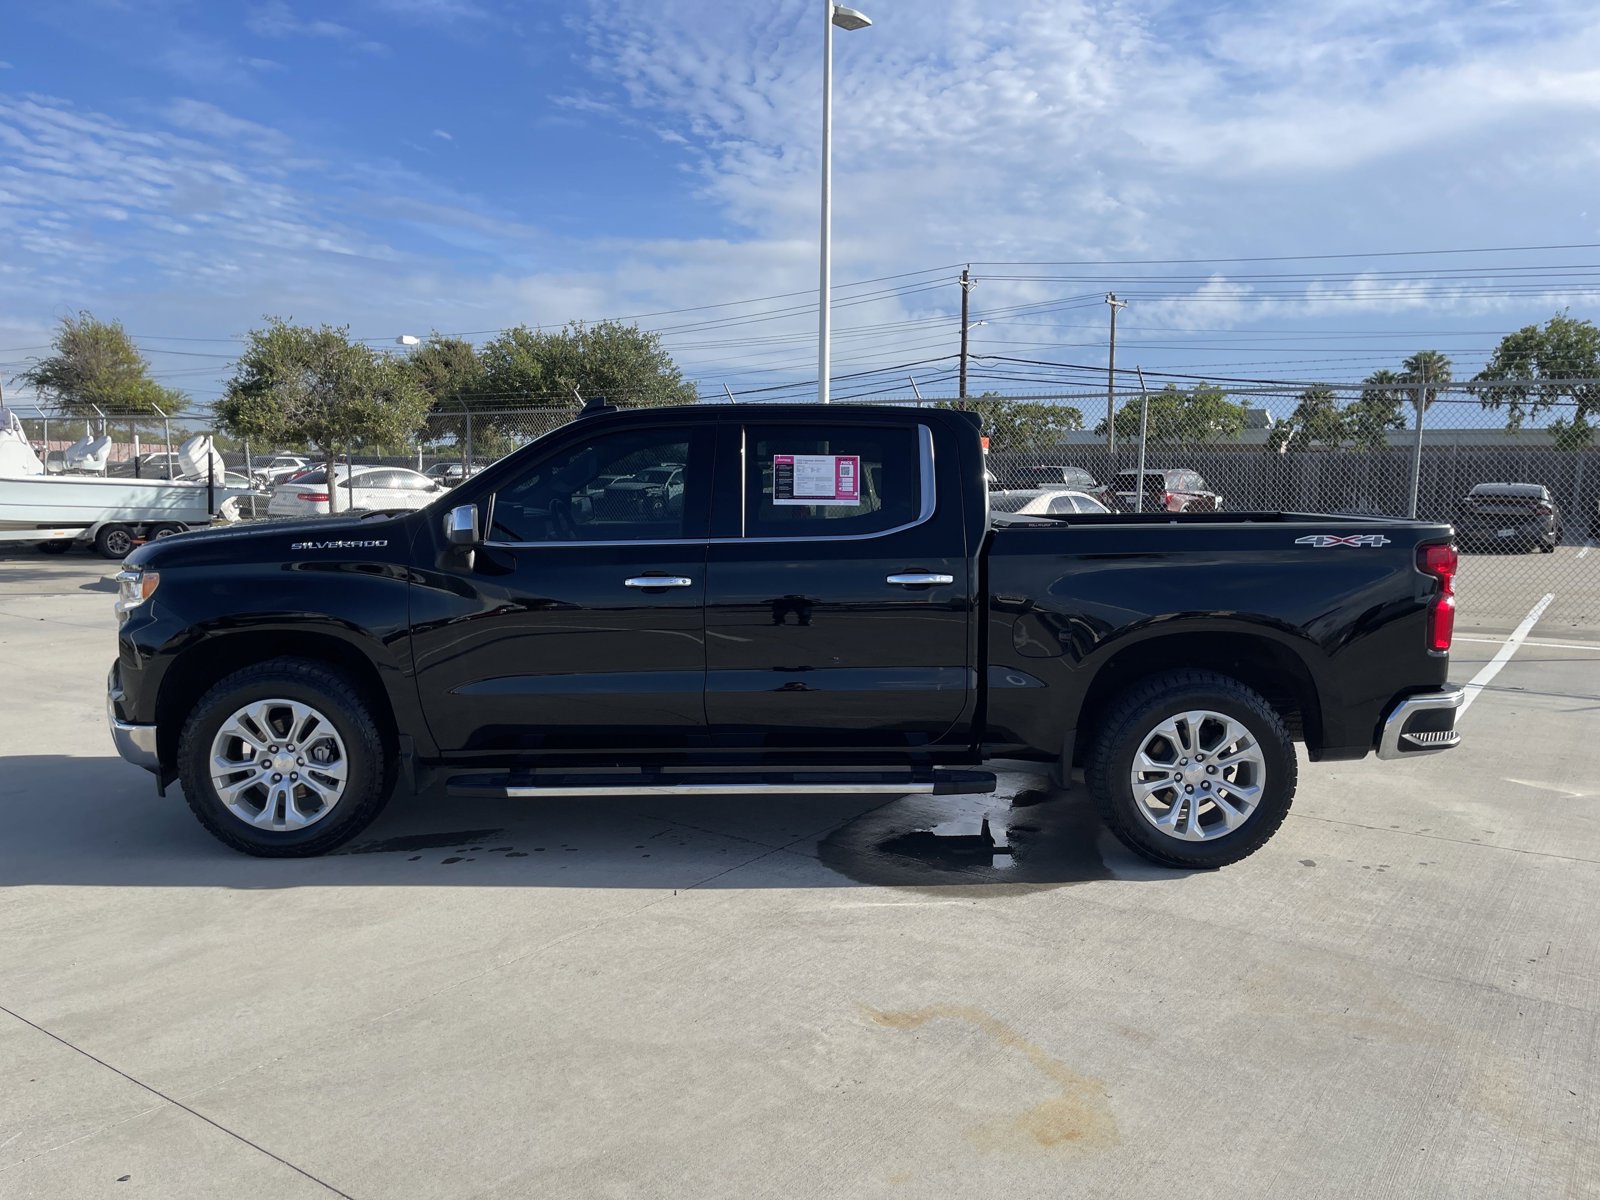 Used 2022 Chevrolet Silverado 1500 LTZ with VIN 2GCUDGED2N1507049 for sale in Corpus Christi, TX